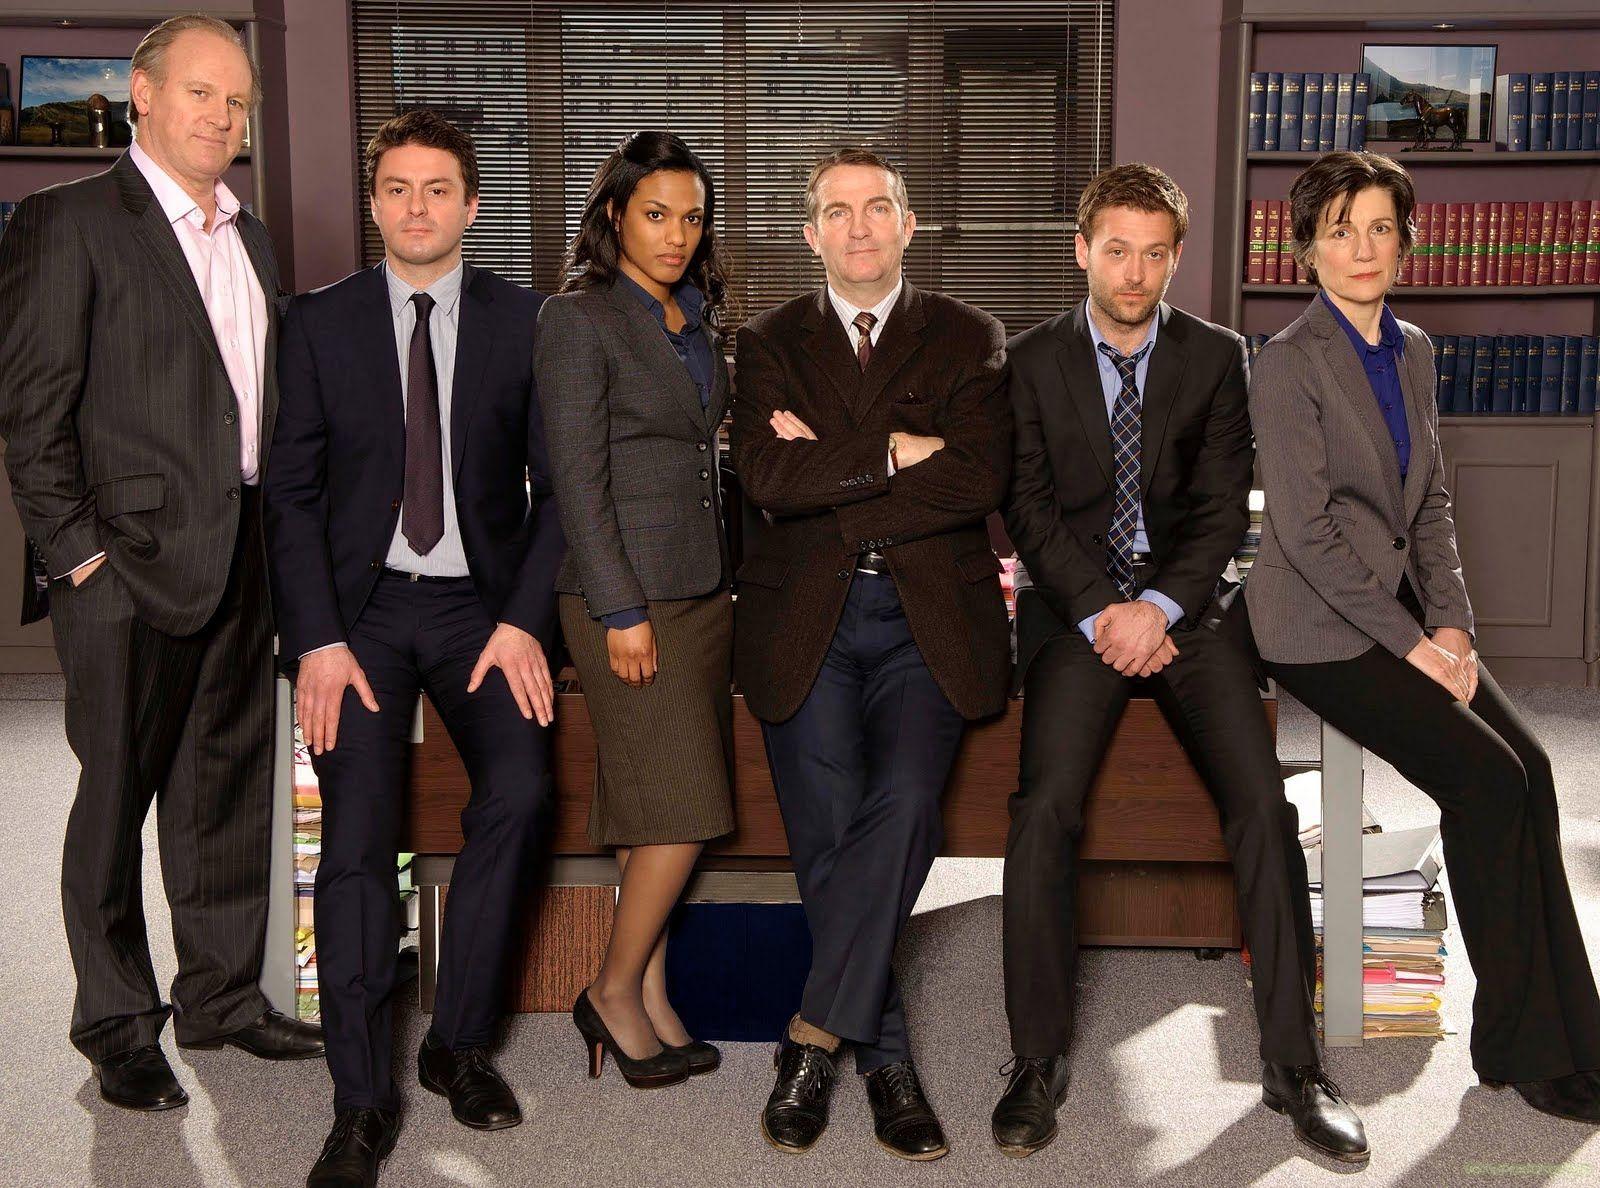 law and order uk Wallpaper and Background Imagex1188